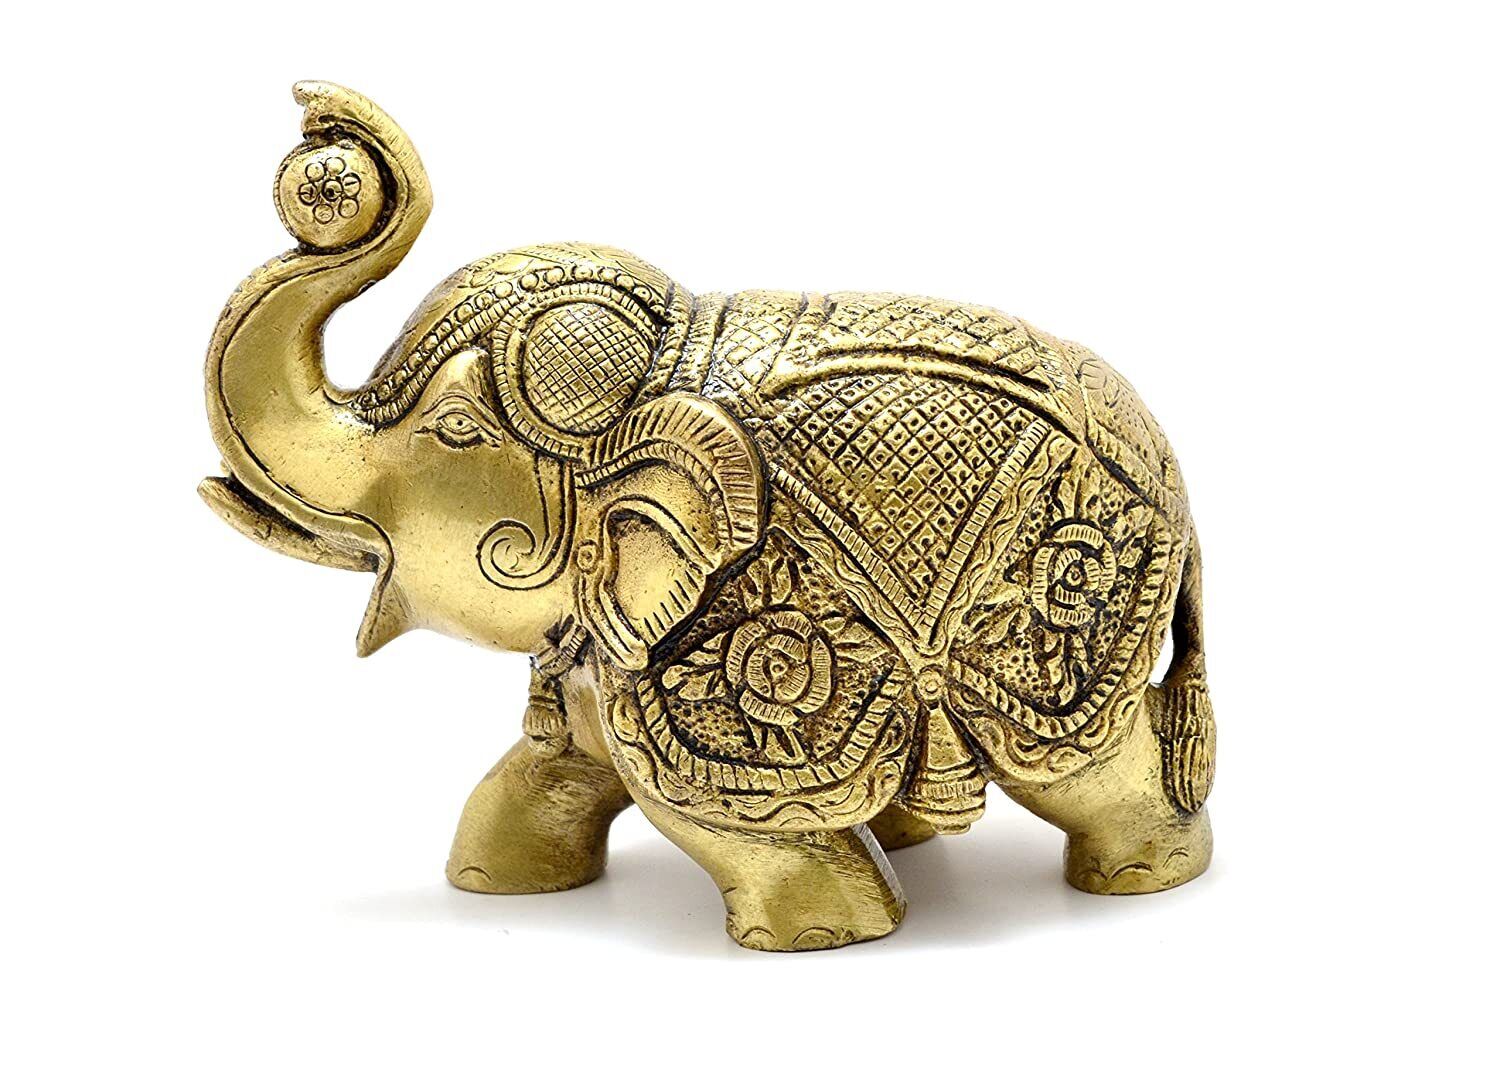 Maharaja Elephant Design Brass Showpiece (5 X 2.5 X 4 Inches, Pack of 1)